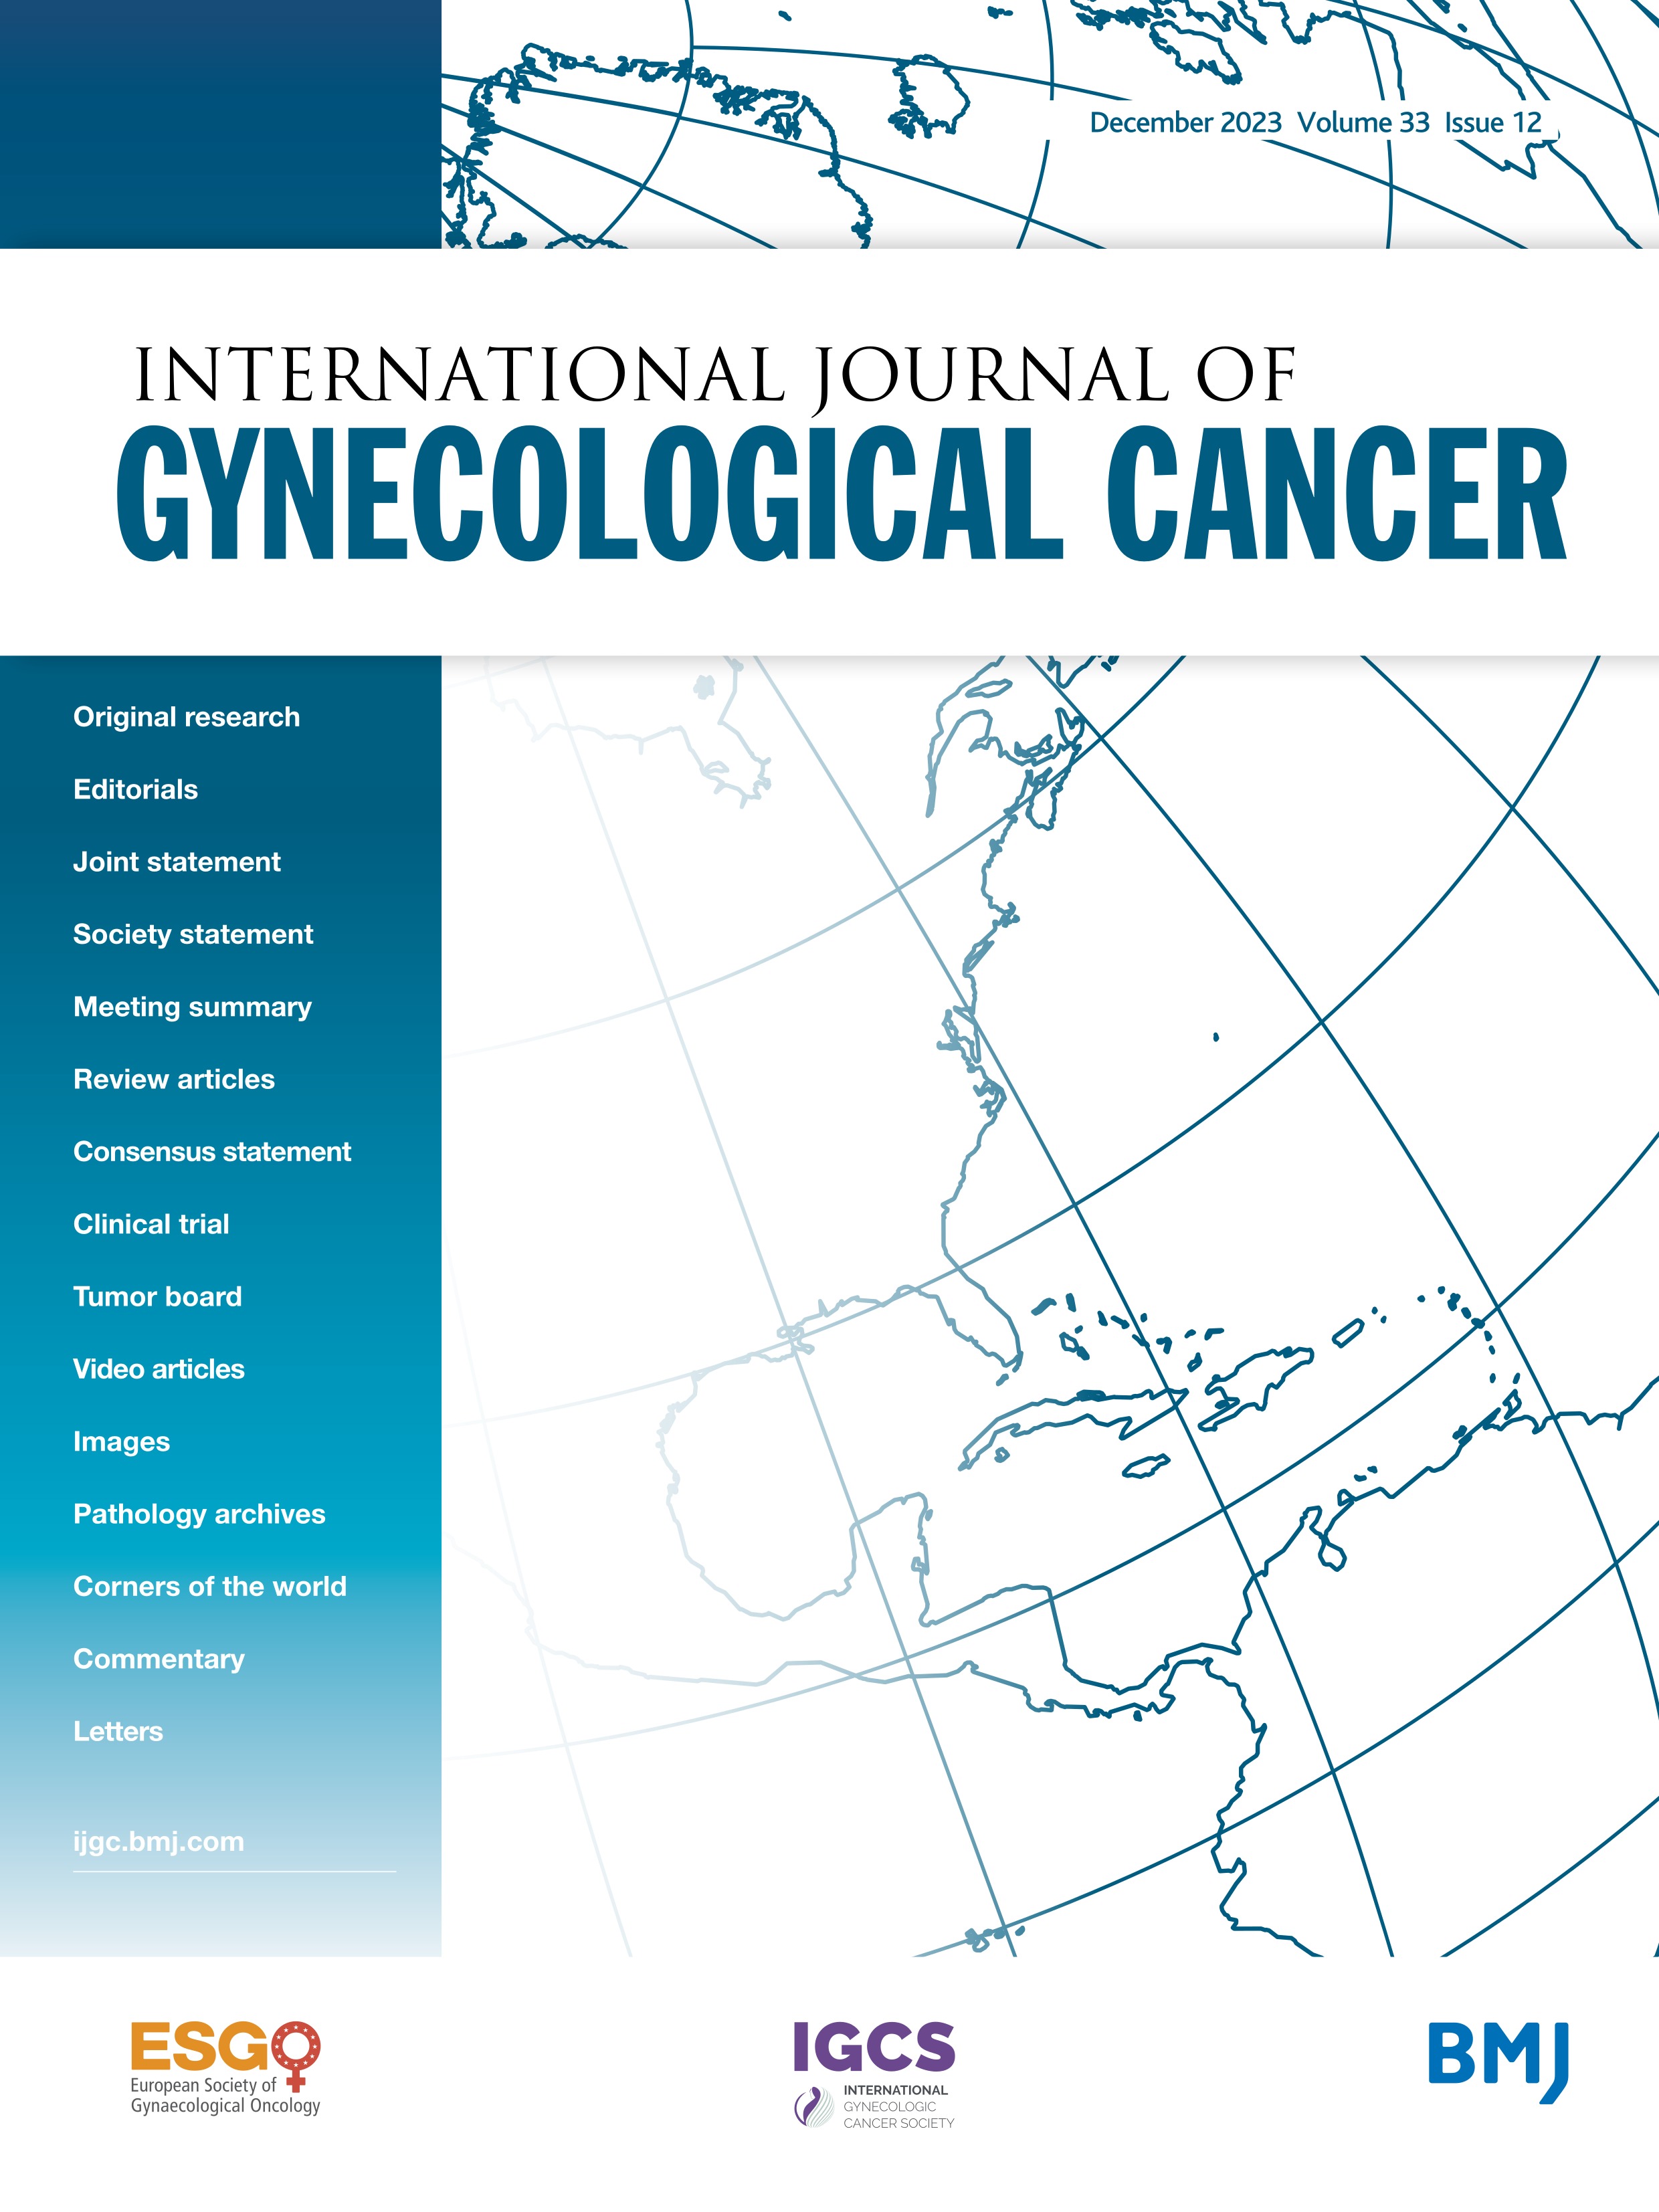 Adherence to ESGO guidelines and impact on survival in obese patients with endometrial cancer: a multicentric retrospective study